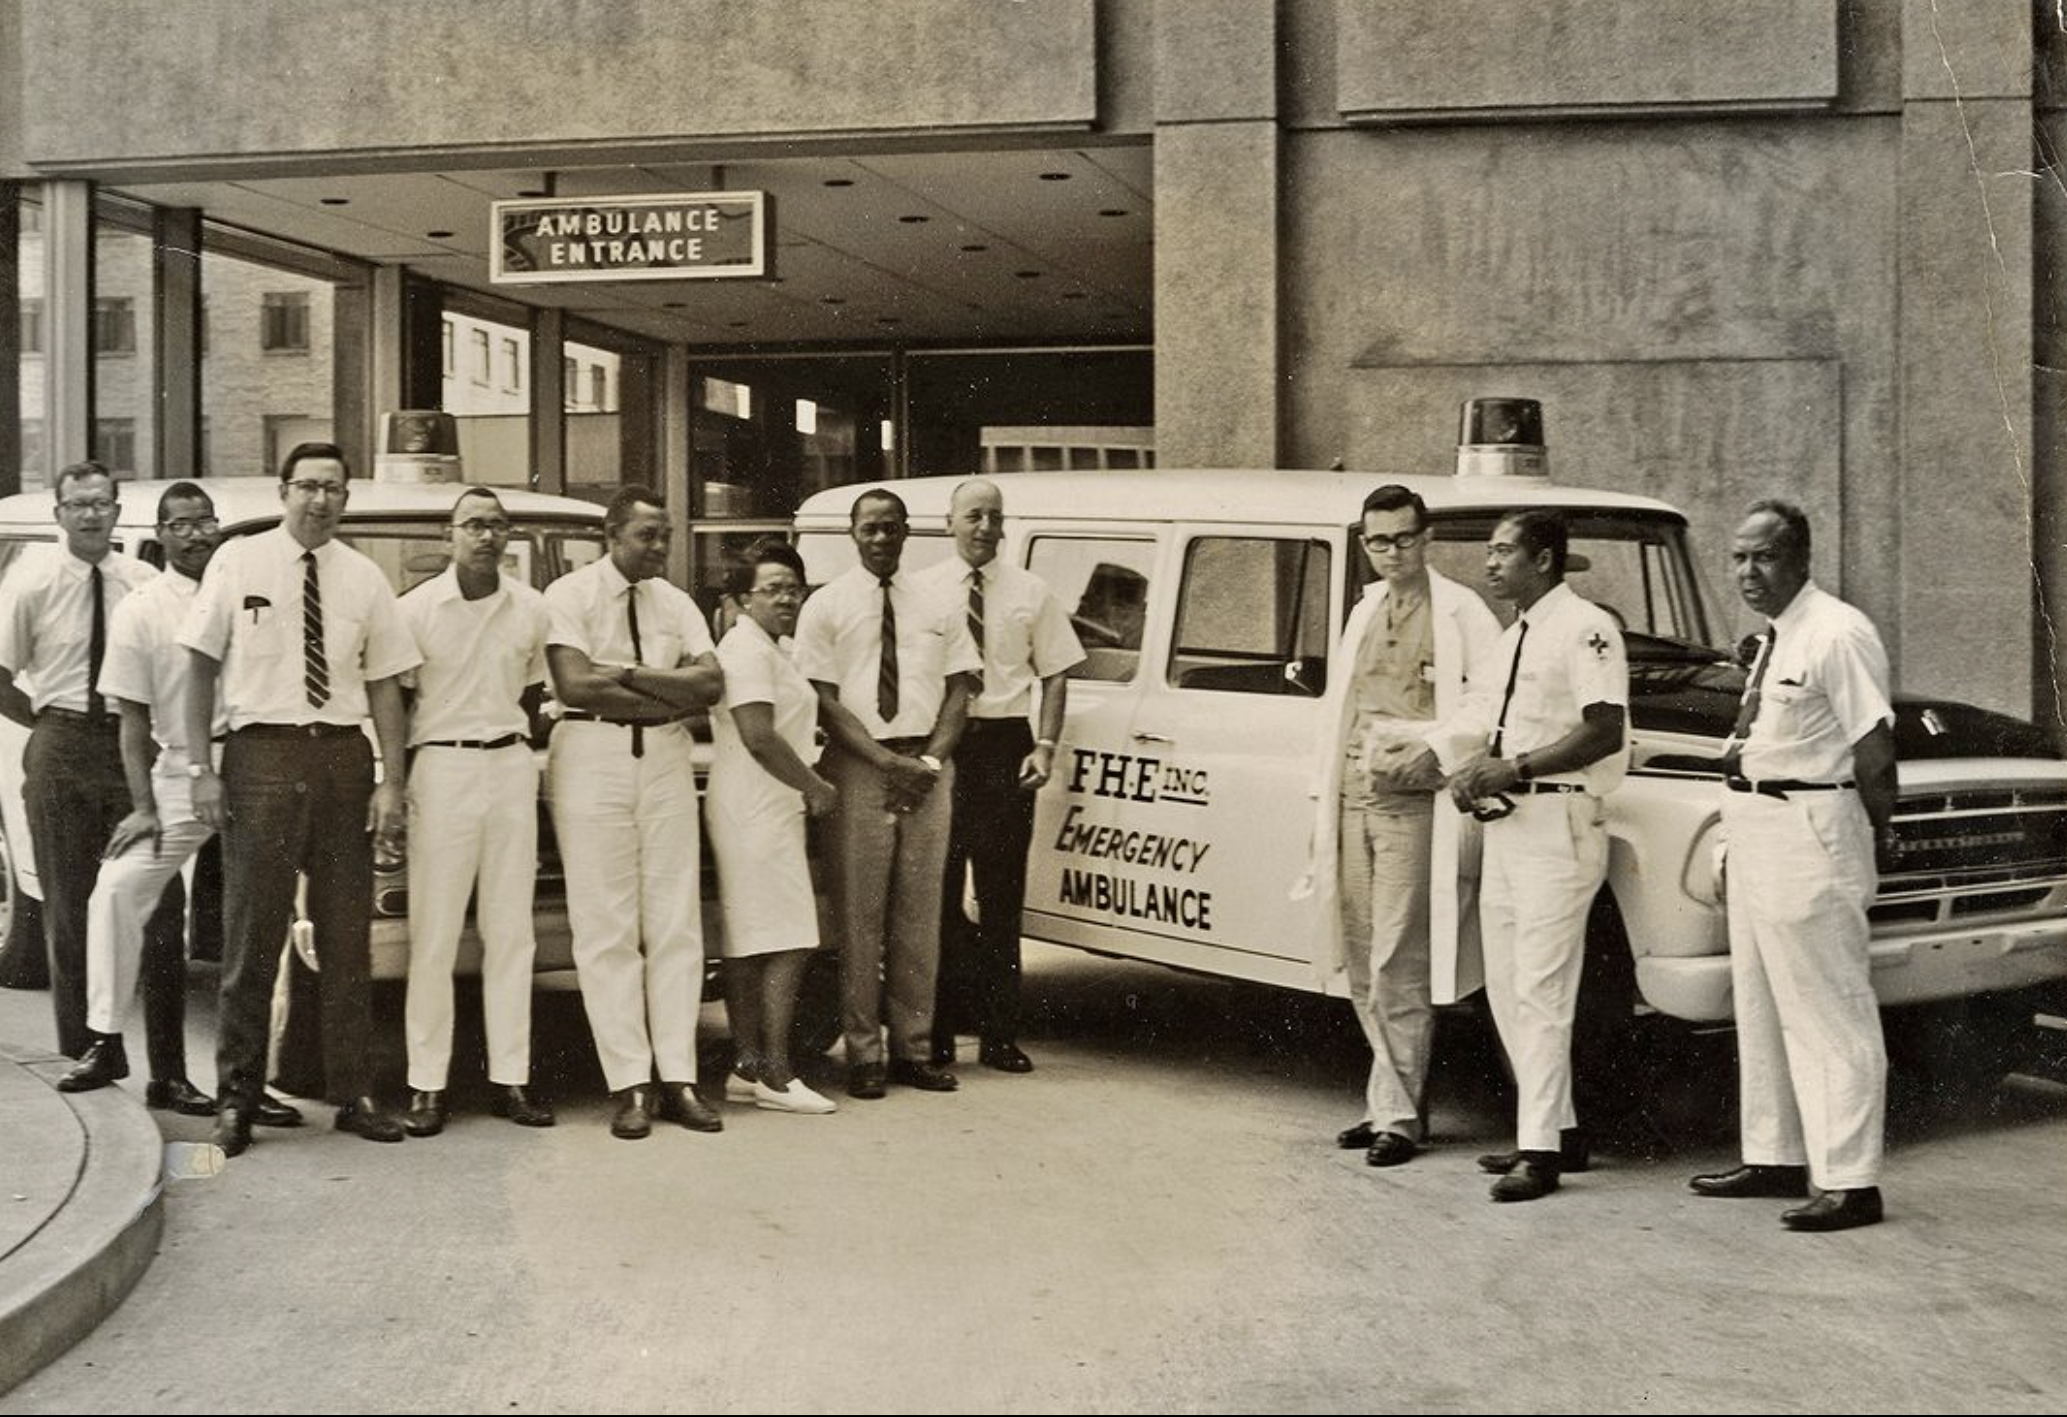 An old photo of white and Black men outside an ambulance entrance at a hospital.